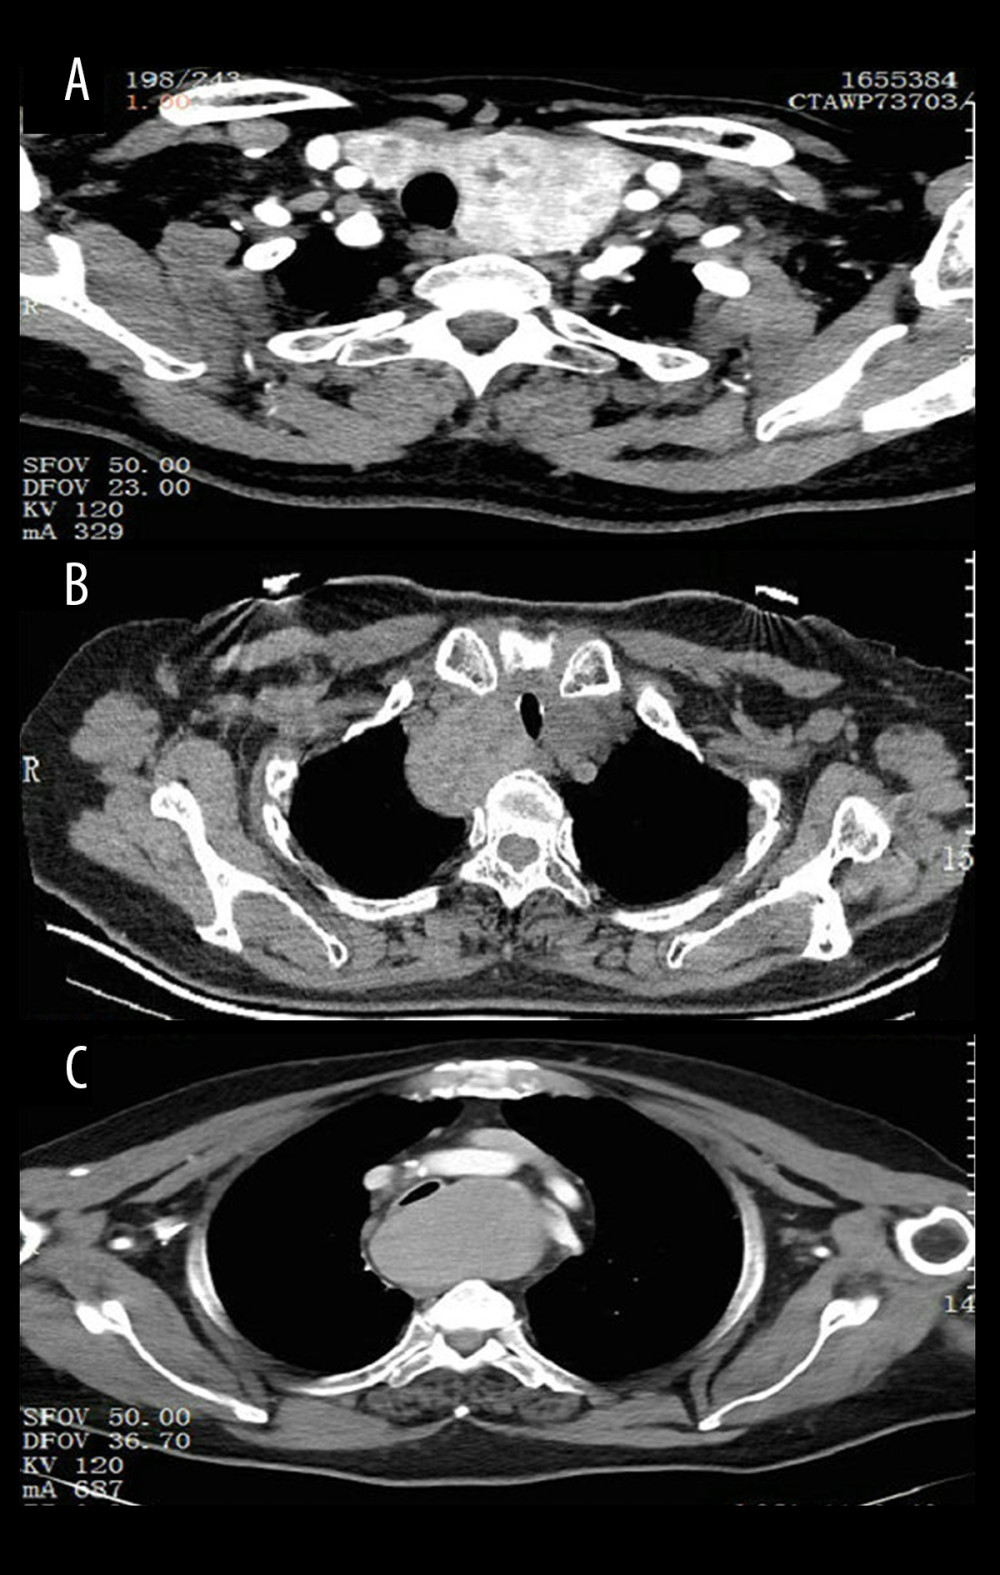 Three grades of retrosternal goiter were detected on CT scans. (A) grade I stenosis, less than 50% obstruction; (B) grade II stenosis, 51% to 70% obstruction; (C) grade III stenosis, 71% to 99% obstruction. There were no cases of grade IV stenosis.